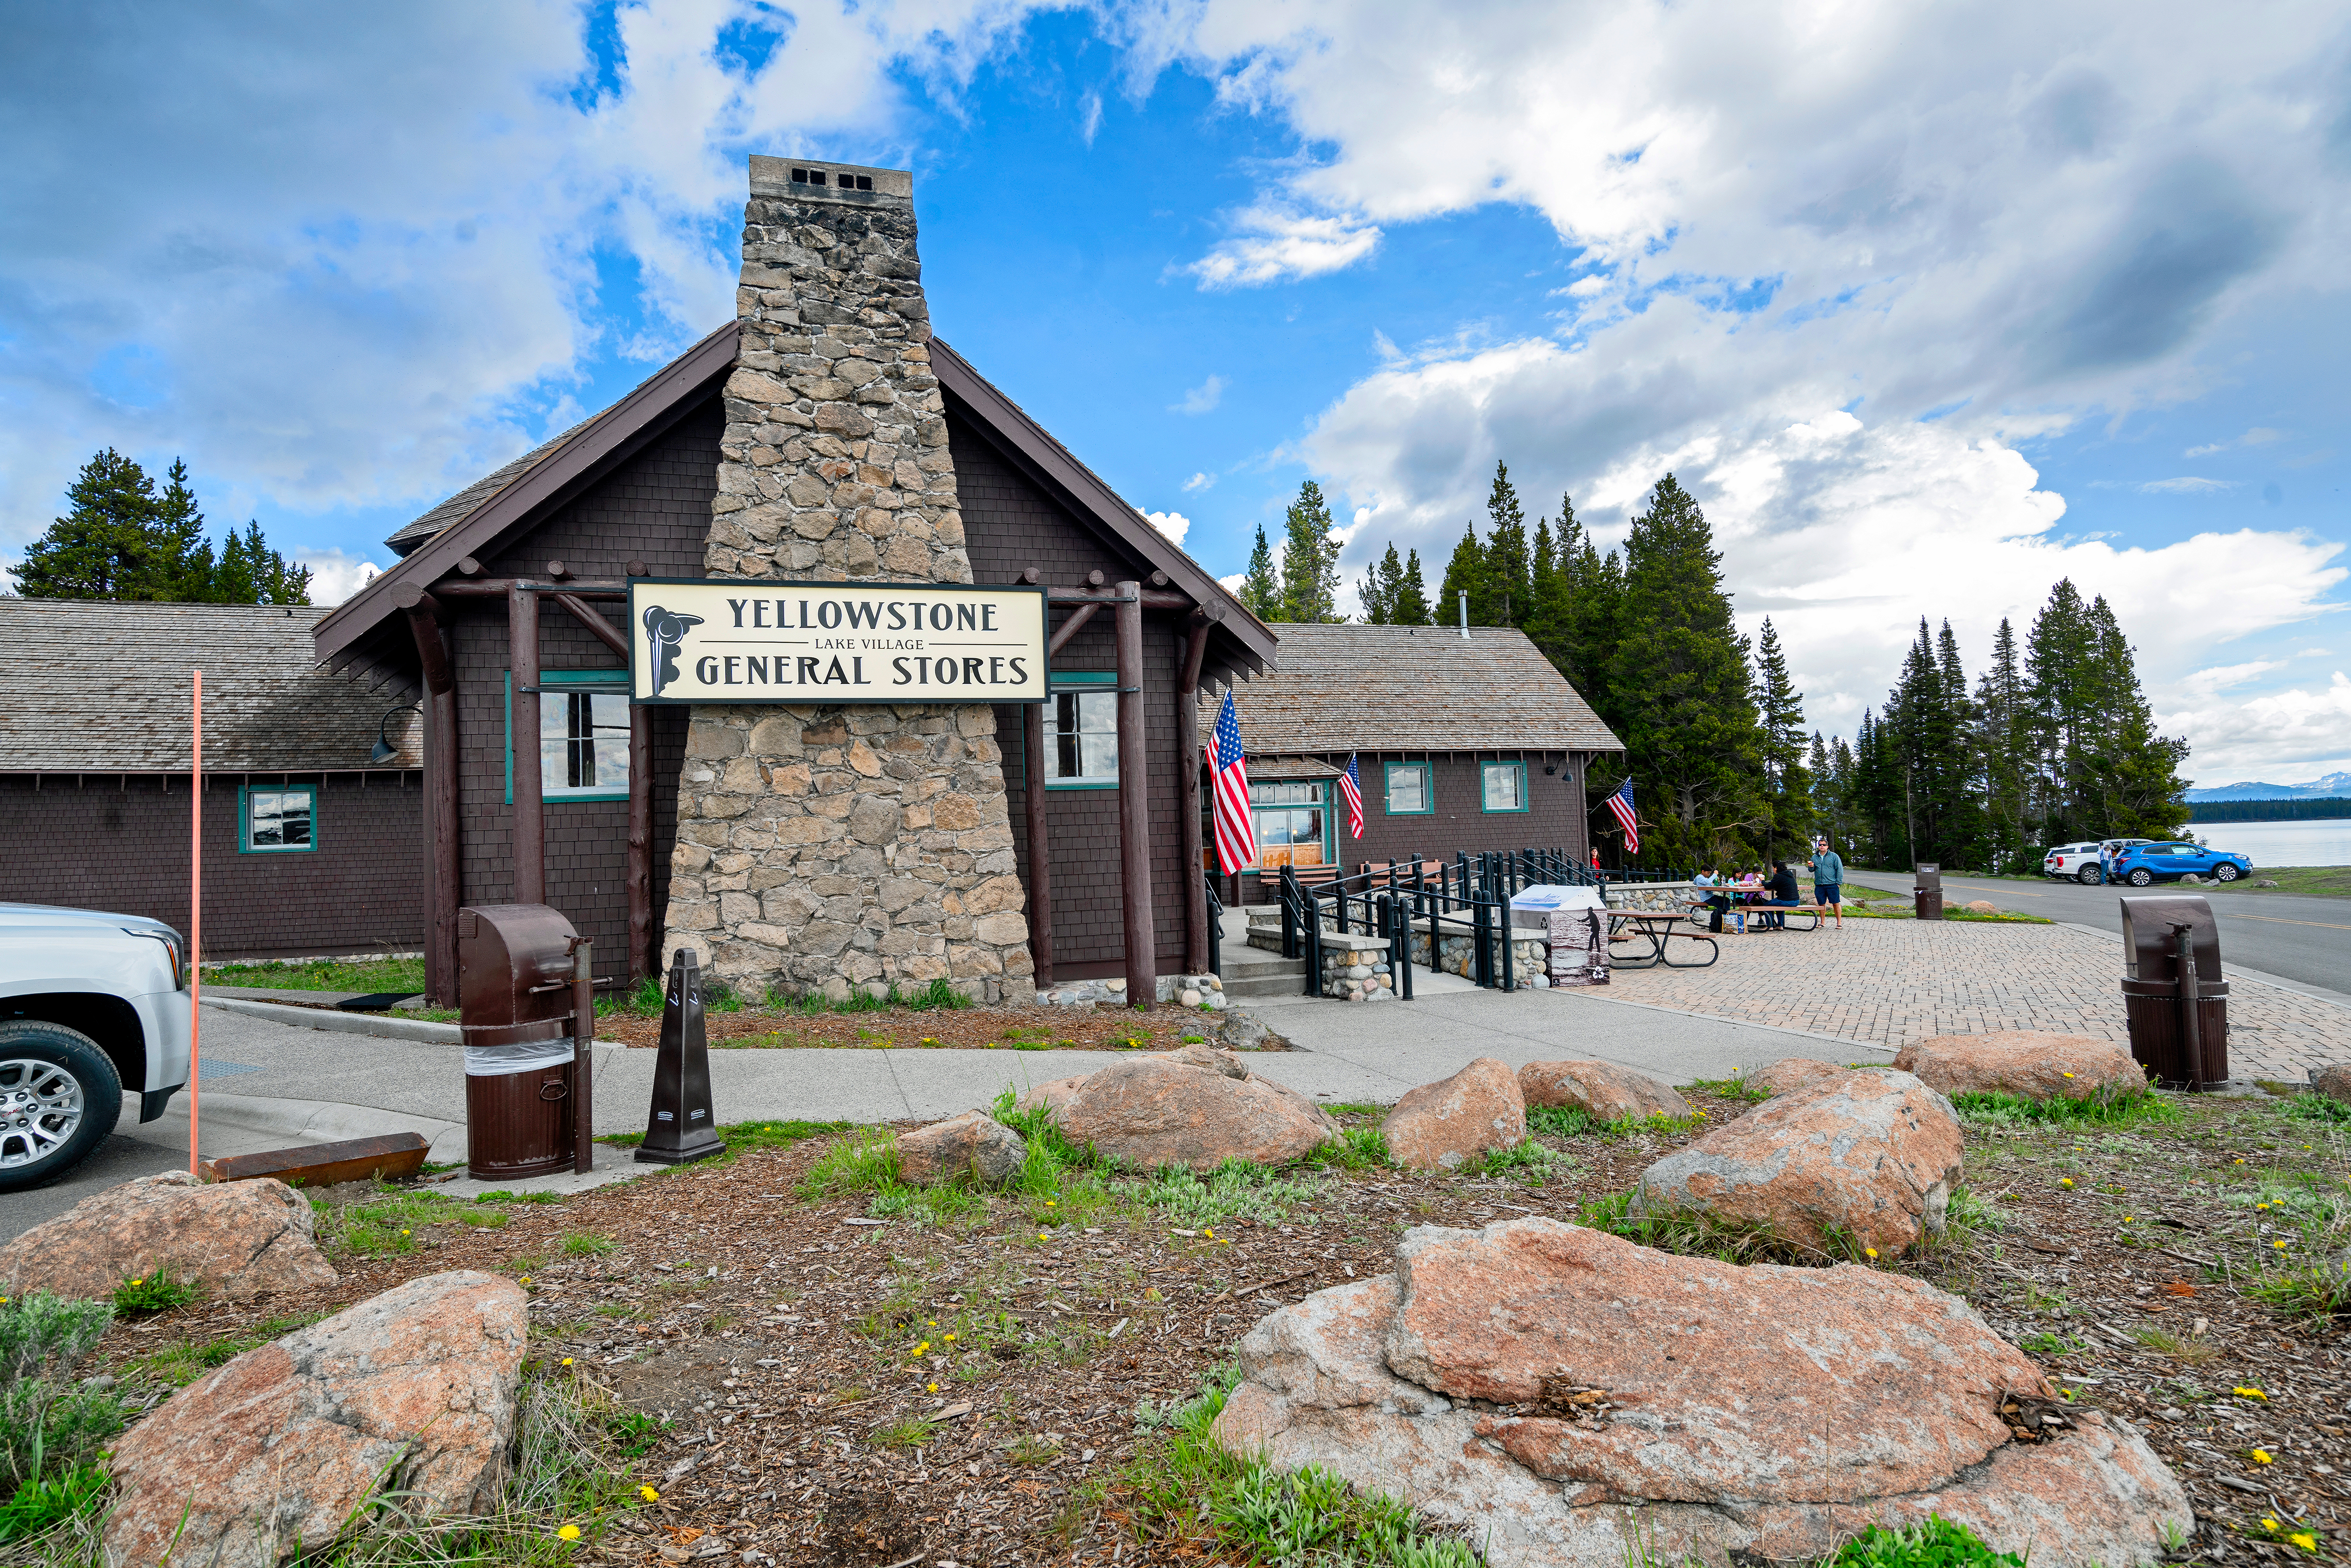 Lake Village General Store in Yellowstone National Park